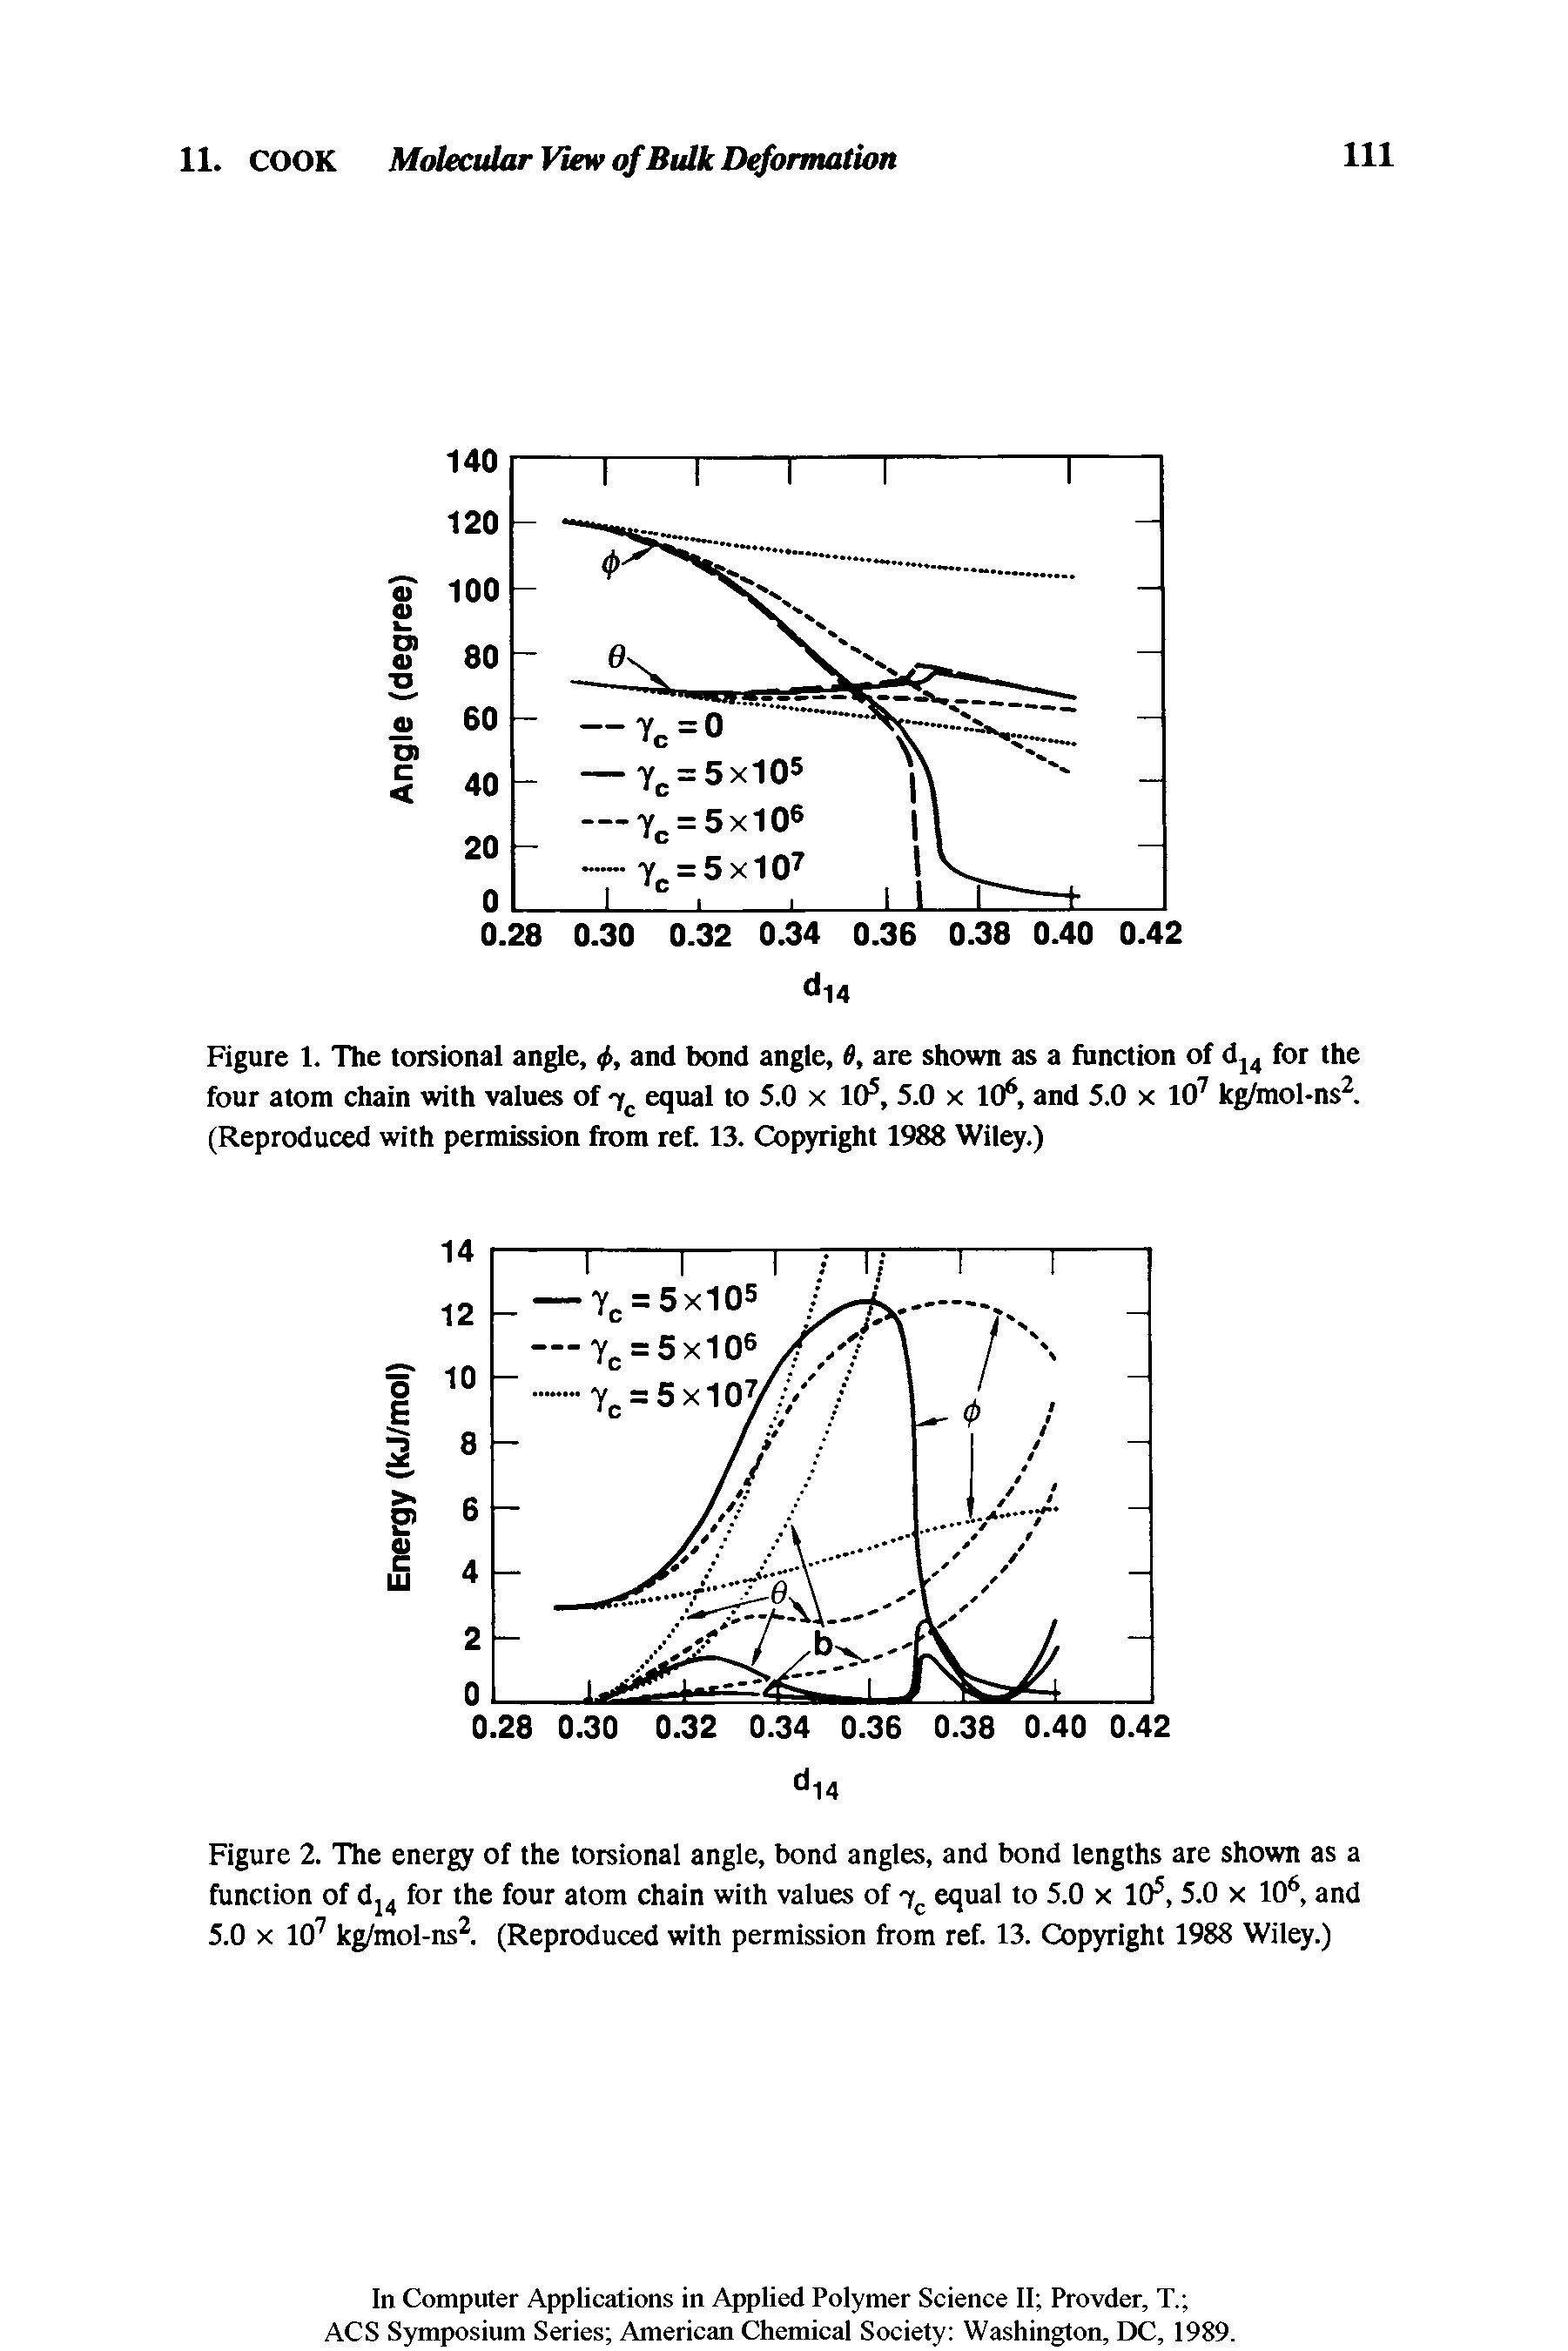 Figure 2. The energy of the torsional angle, bond angles, and bond lengths are shown as a function of dj for the four atom chain with values of 7 equal to 5.0 x 10, 5.0 x 10 and 5.0 X 10 kg/mol-ns. (Reproduced with permission from ref. 13. Copyright 1988 Wiley.)...